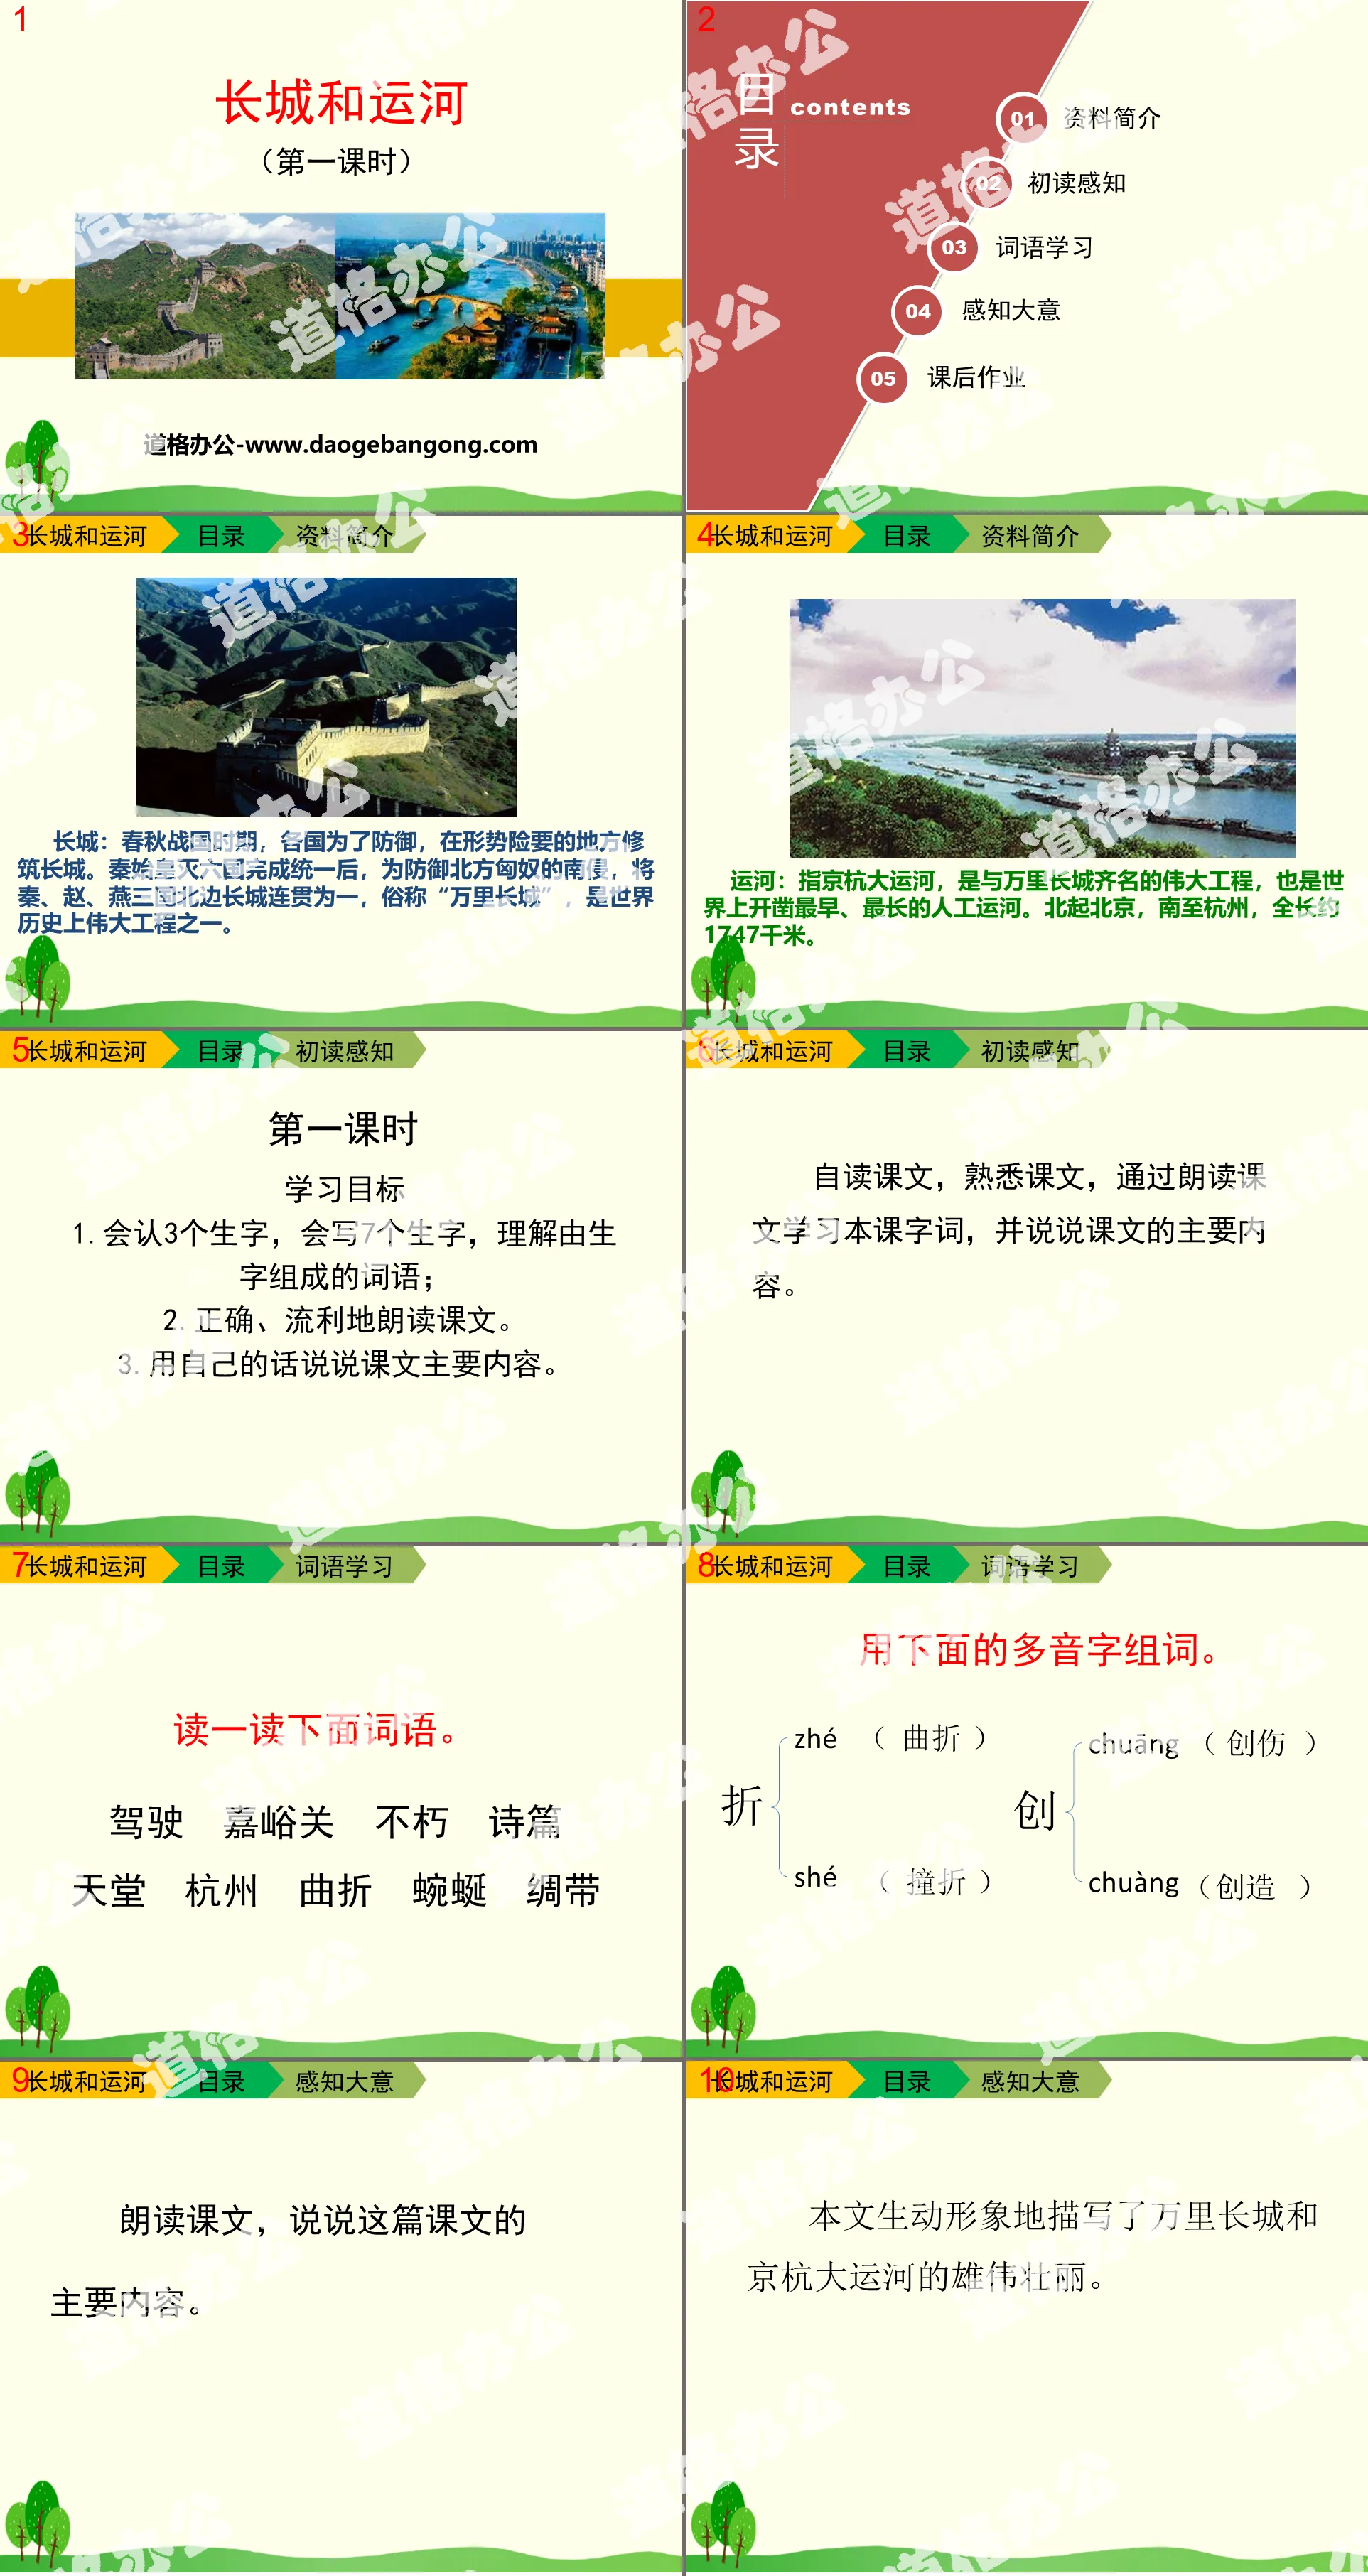 "The Great Wall and Canals" PPT